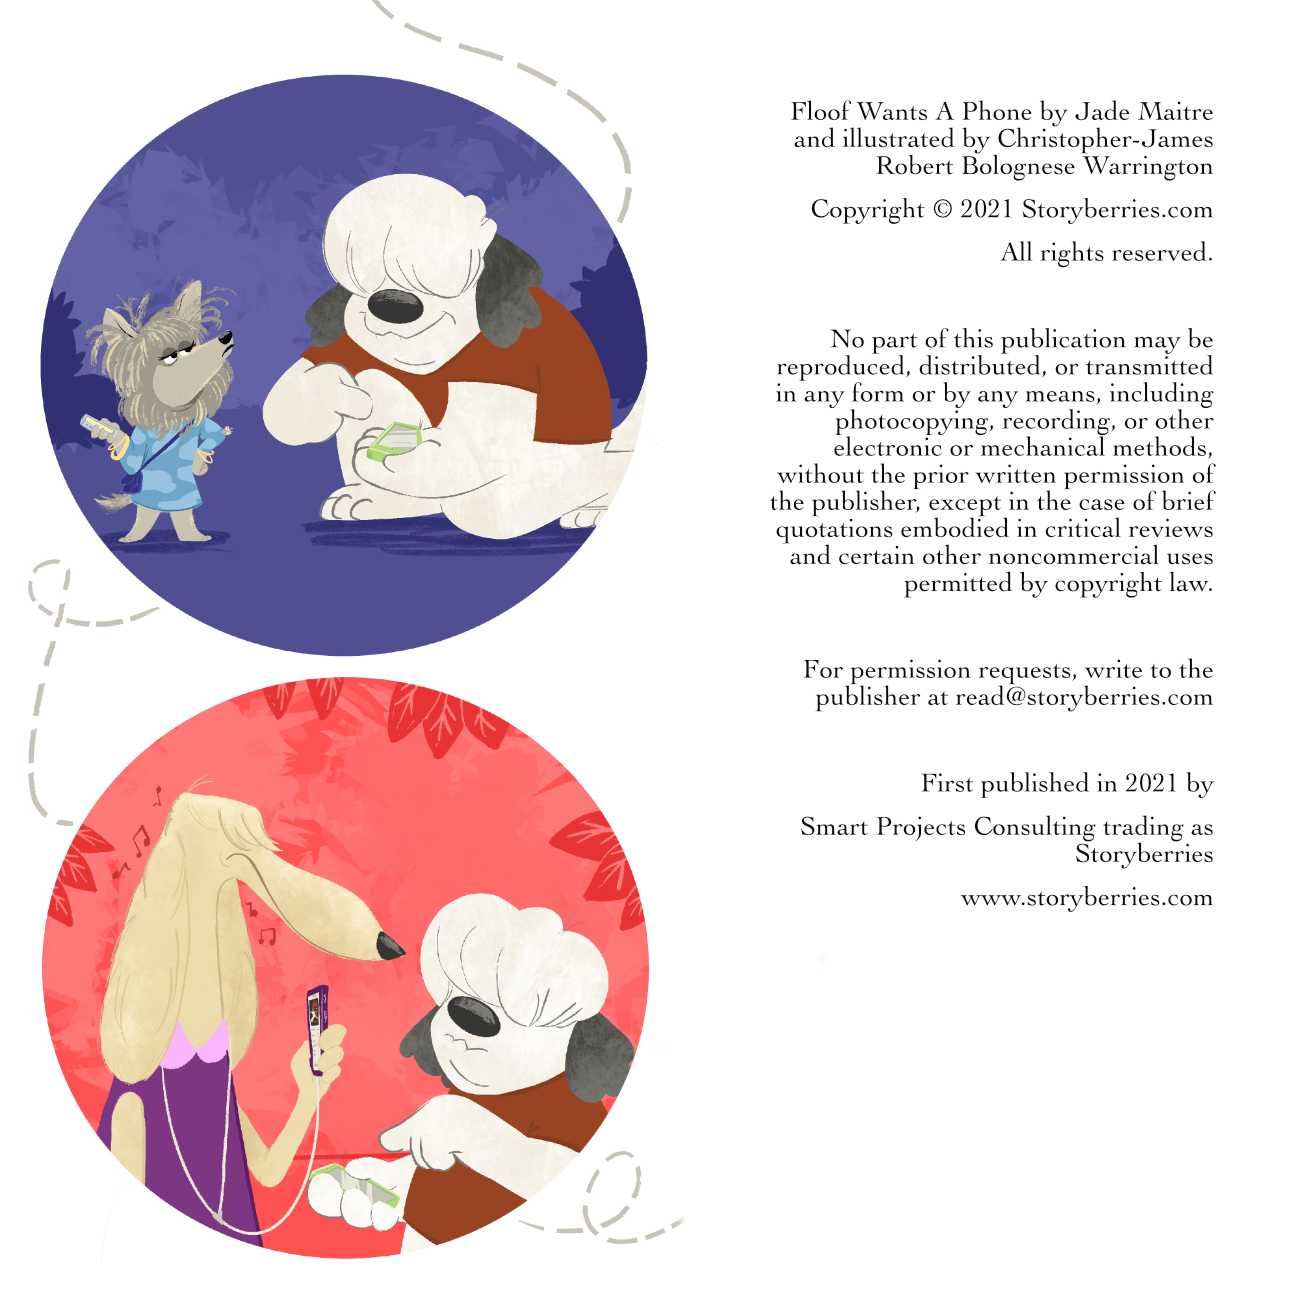 Bedtime Stories Floof Wants A Phone funny stories for kids - Copyright page